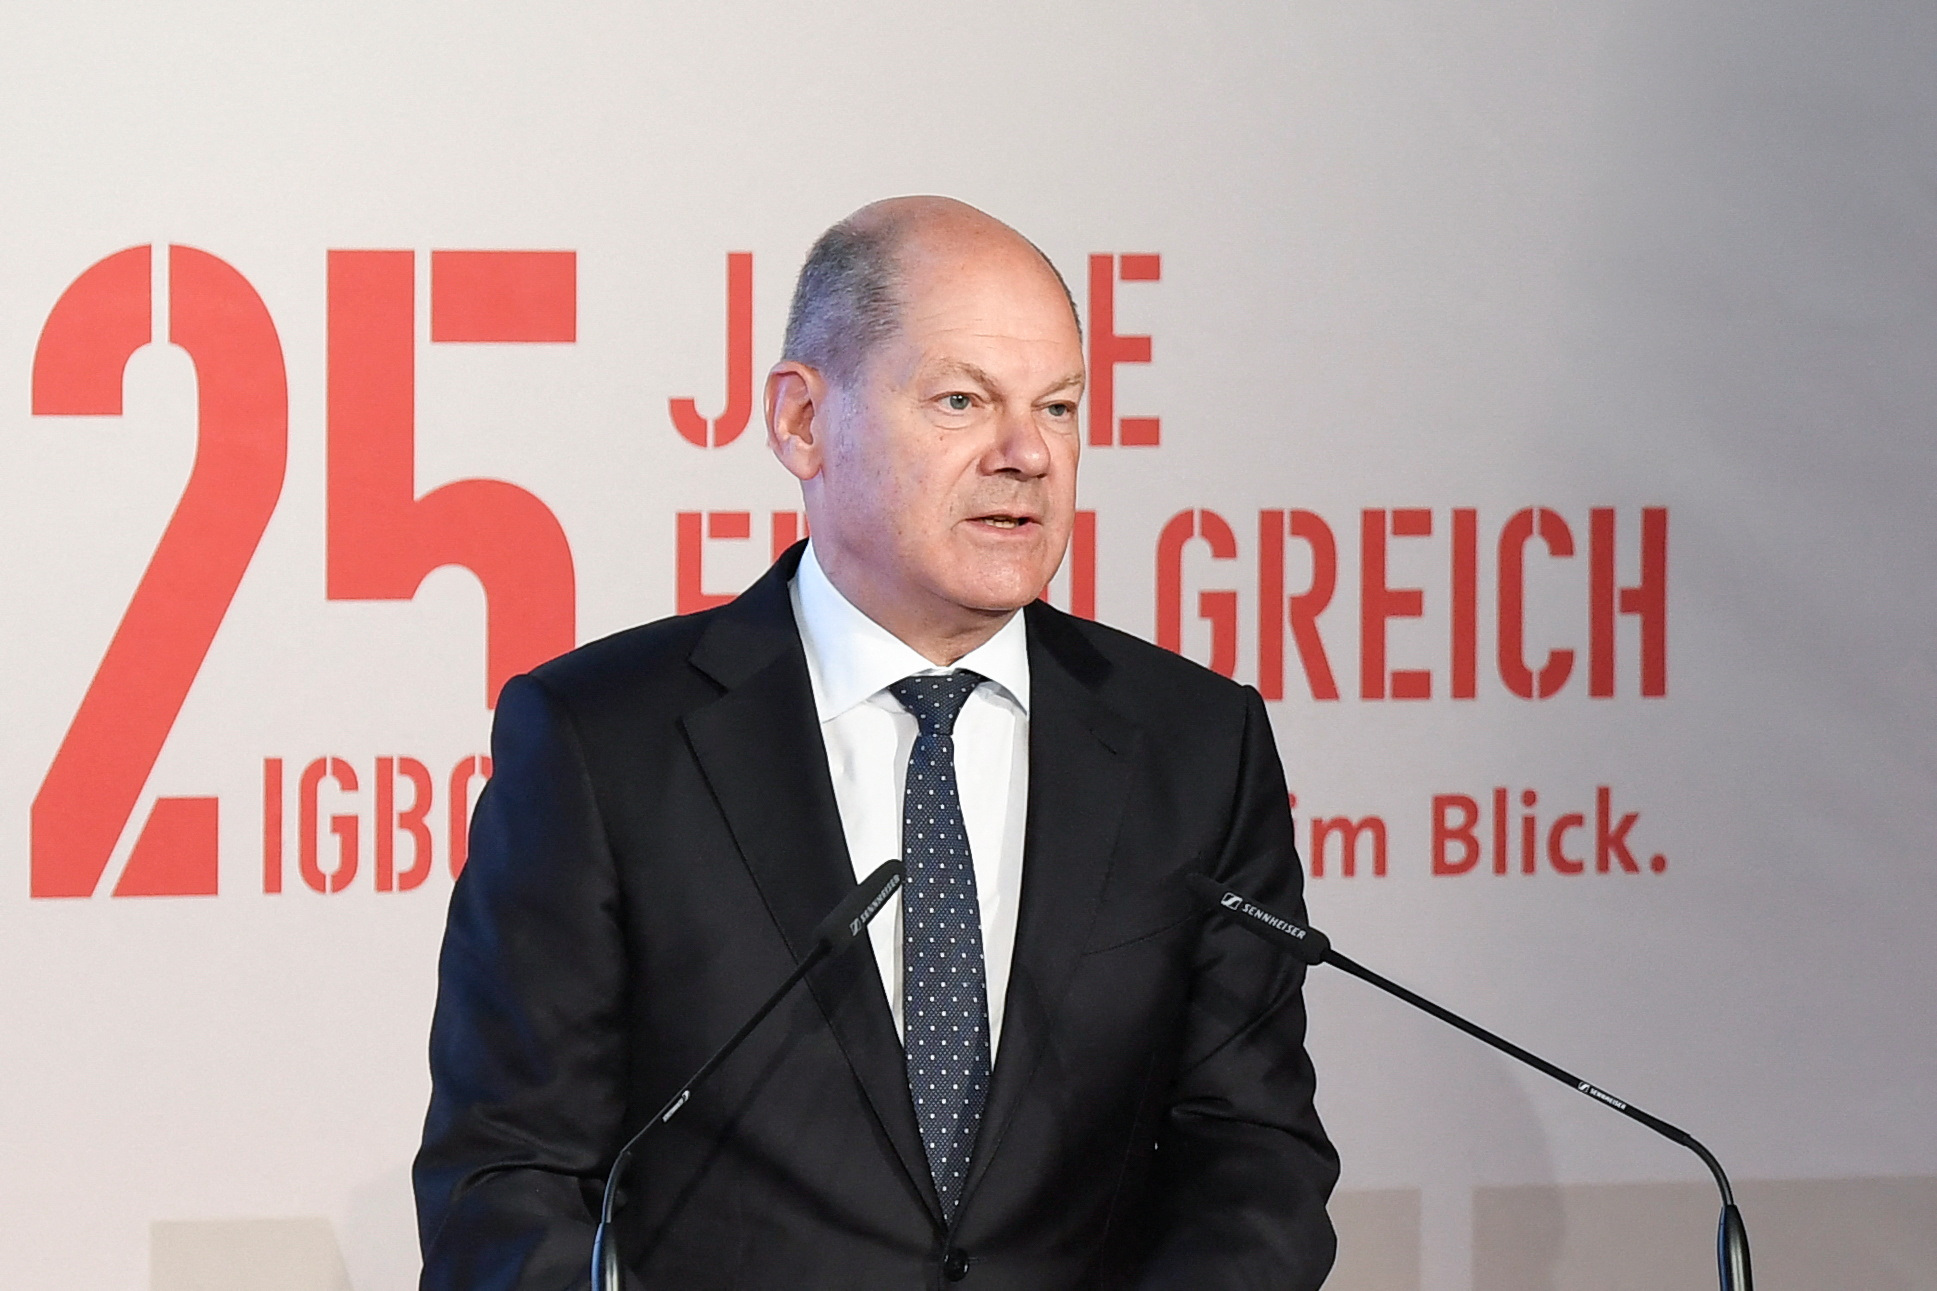 German Chancellor Scholz takes part in the 25th anniversary celebration for the IGBCE